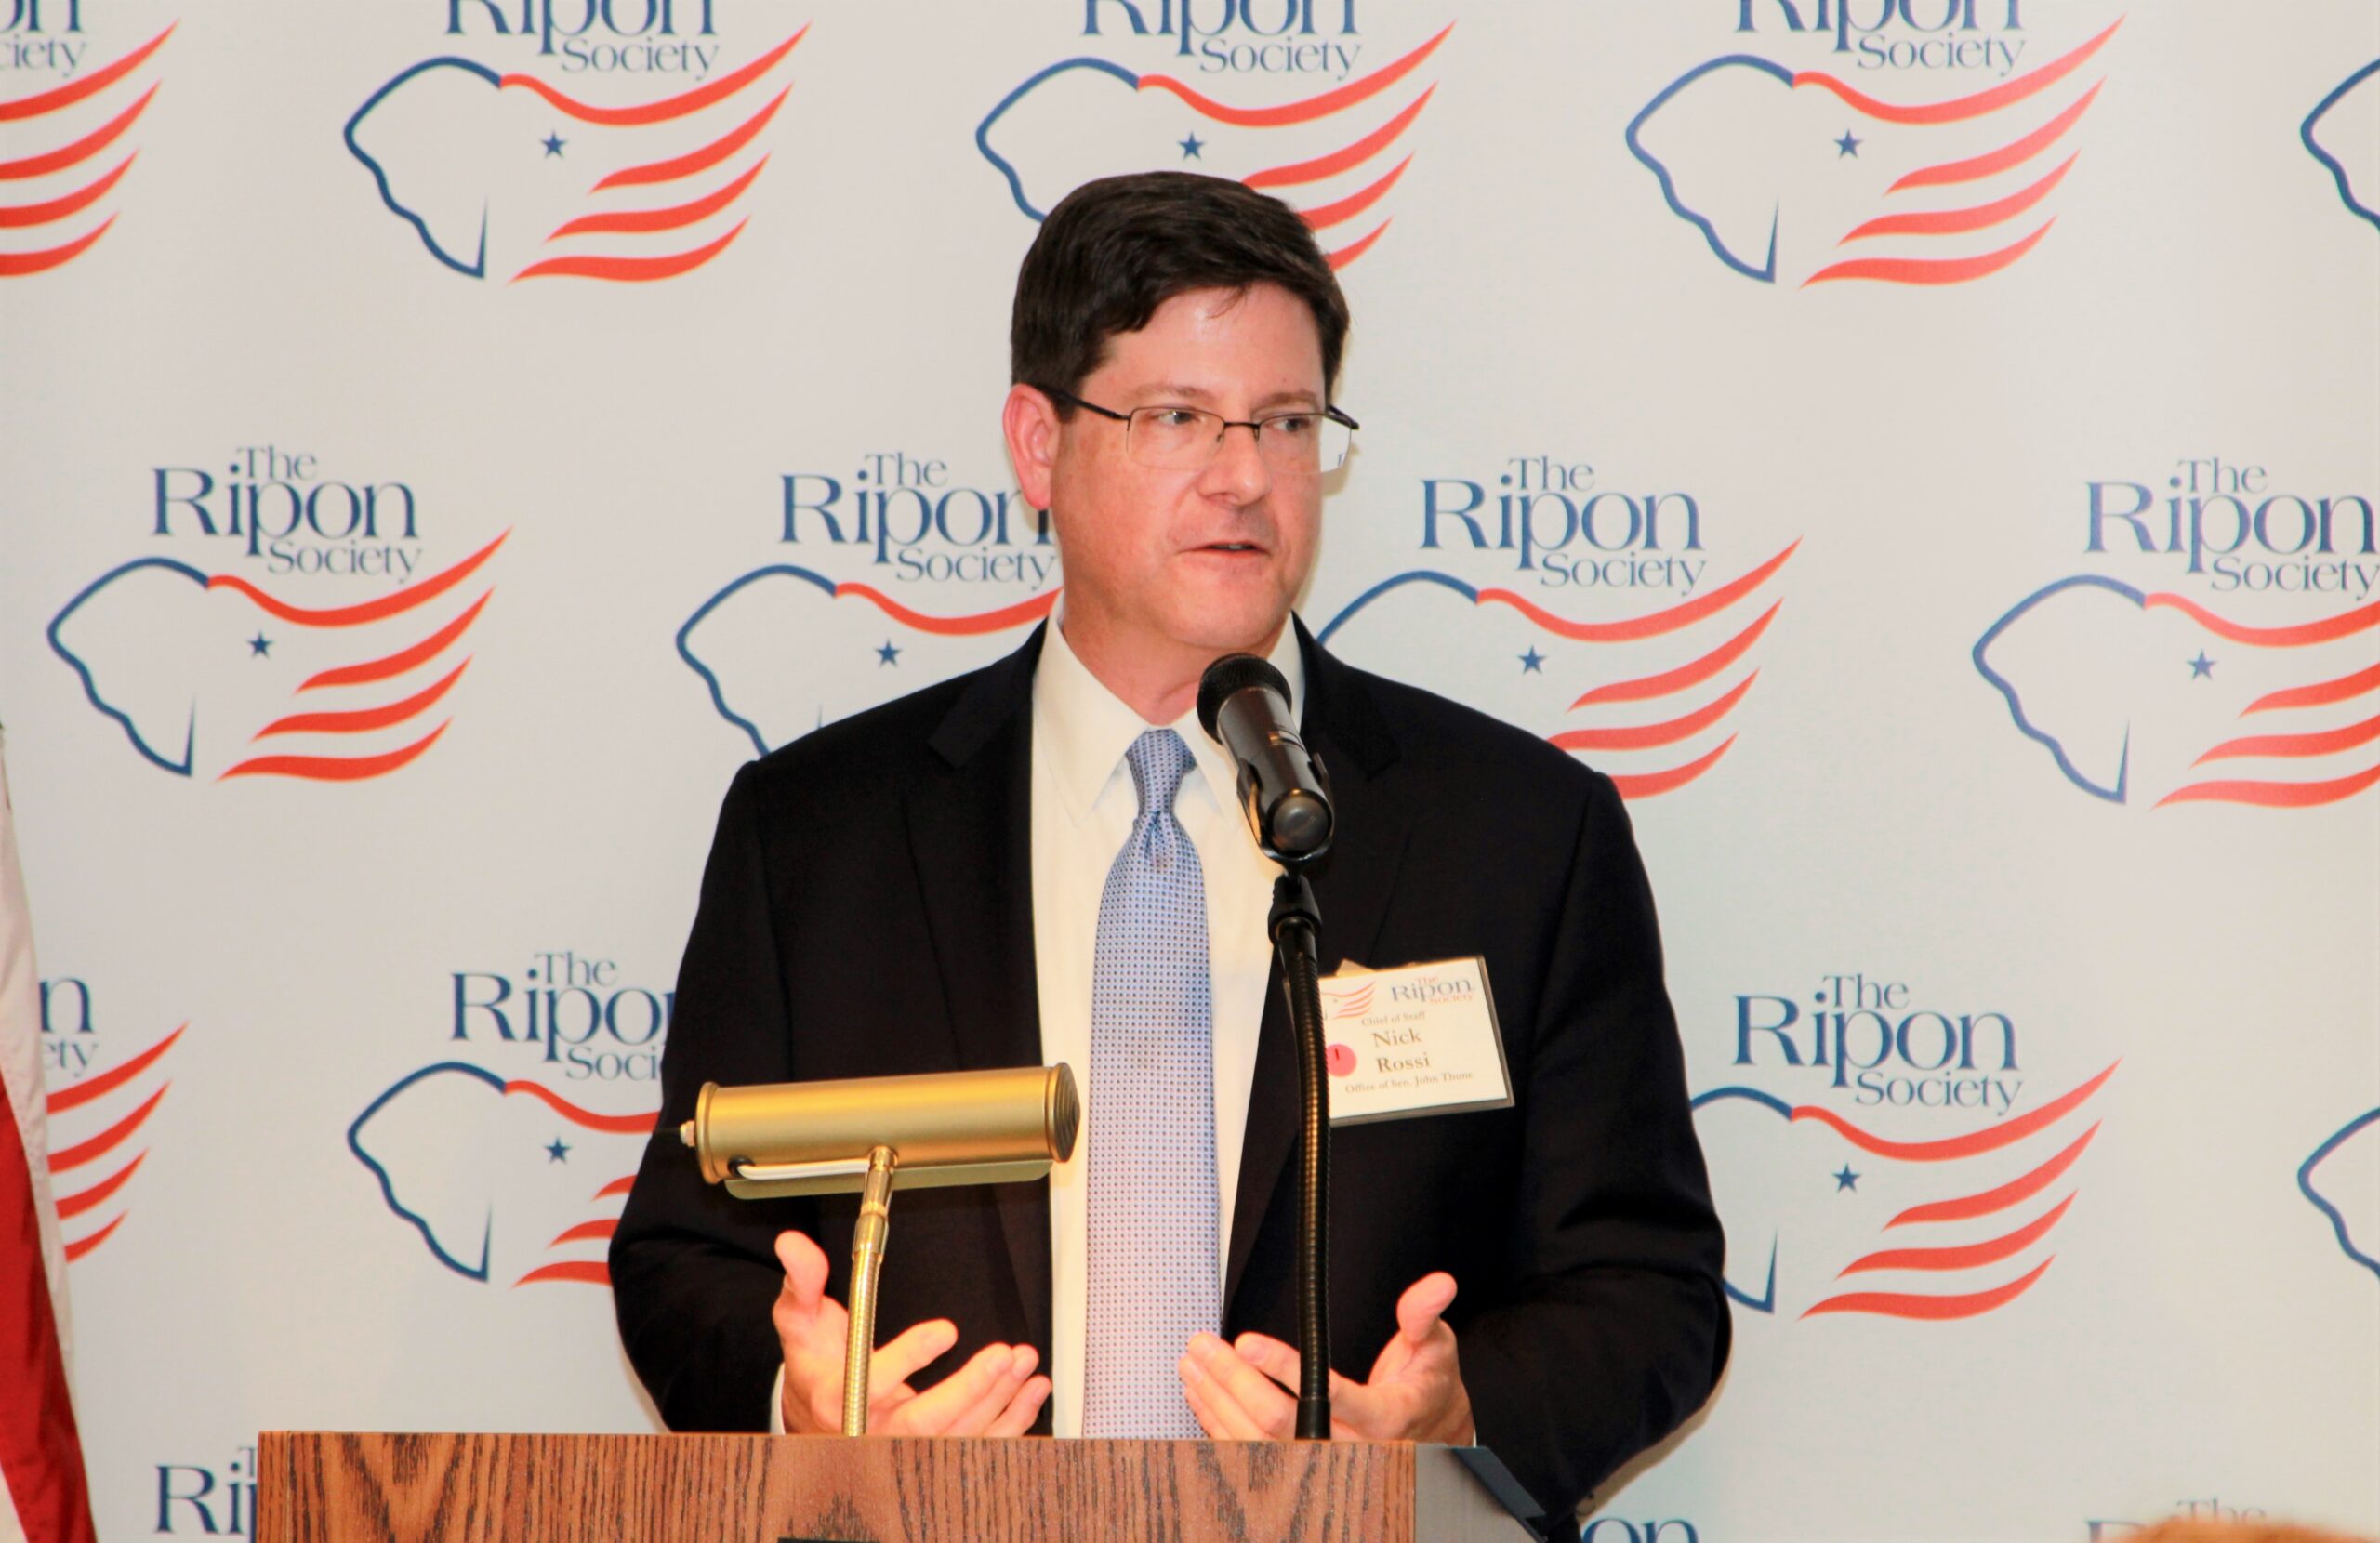 Ripon Society Holds Luncheon Discussion with 11 Senate Chiefs of Staff